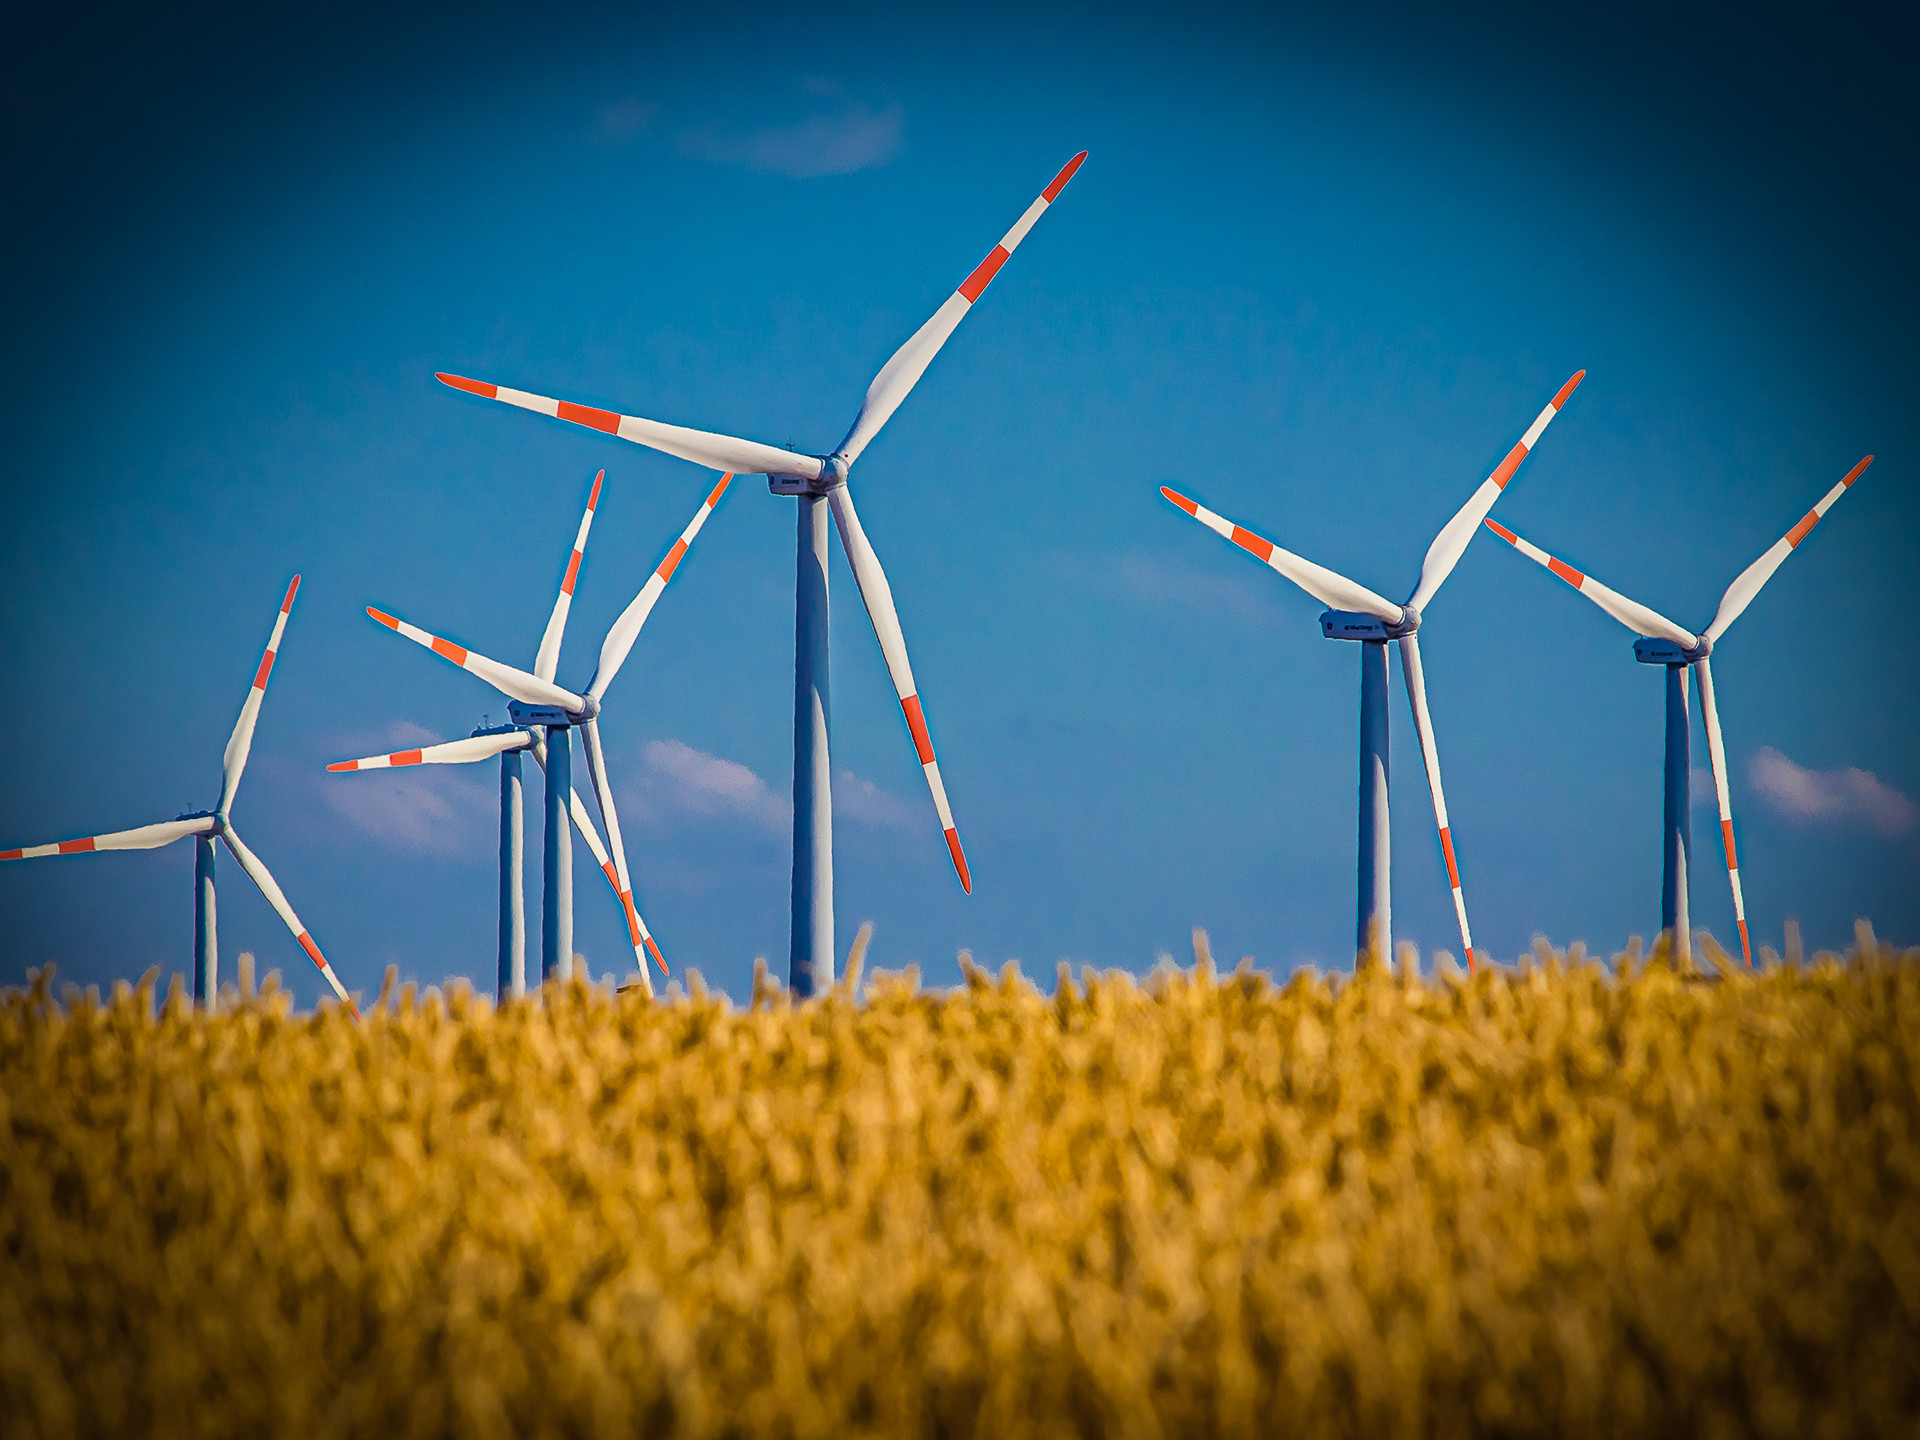 HIGH-PERFORMANCE SYNTHETIC LUBRICANTS FOR WIND POWER